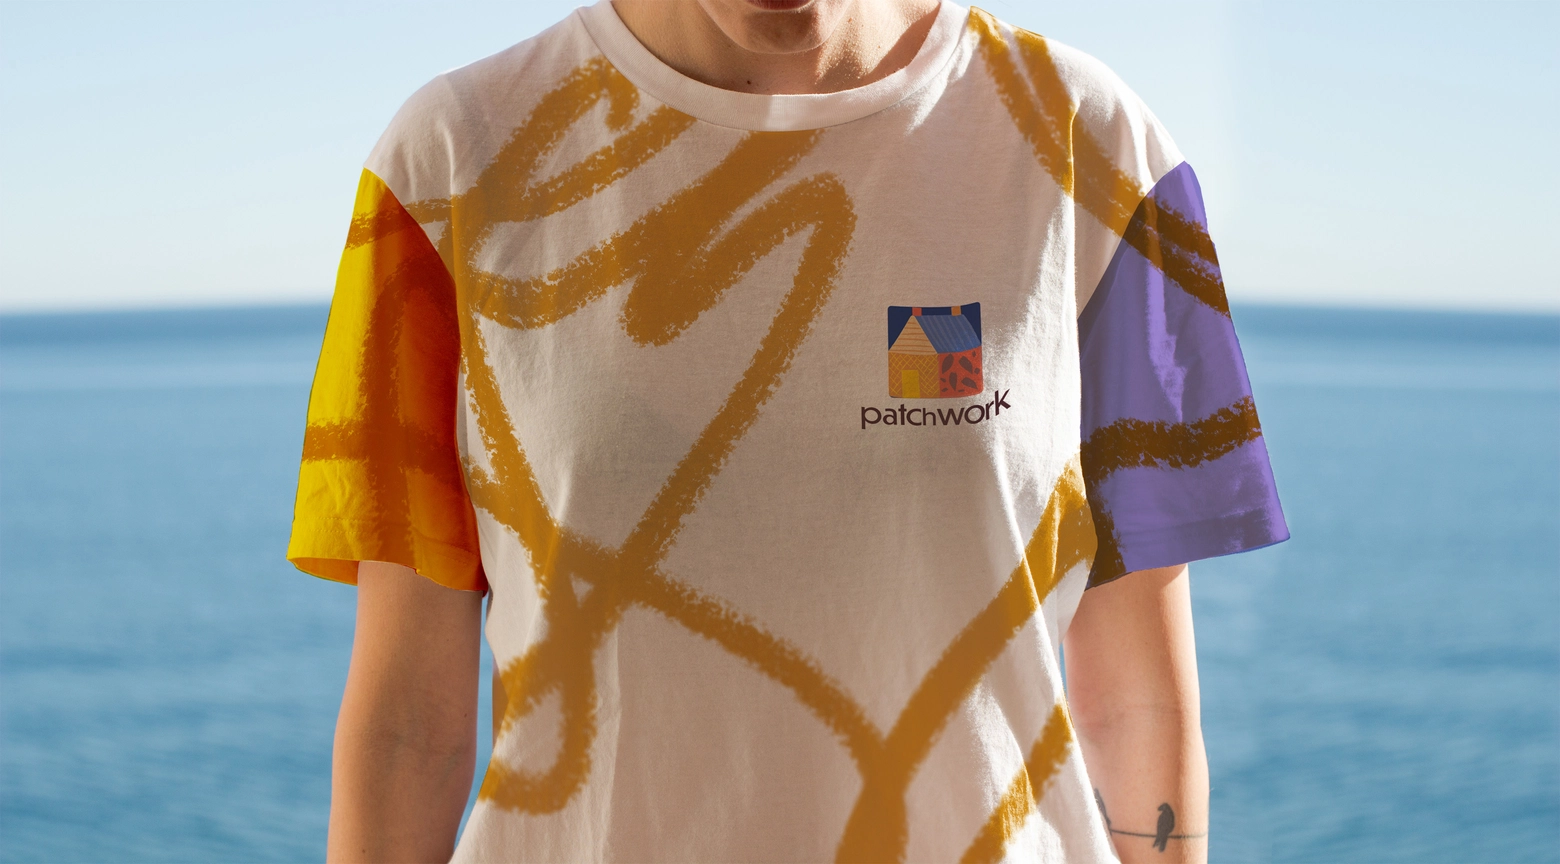 A person wearing a vibrant t-shirt with a colorful line design and Patchwork organisation logo